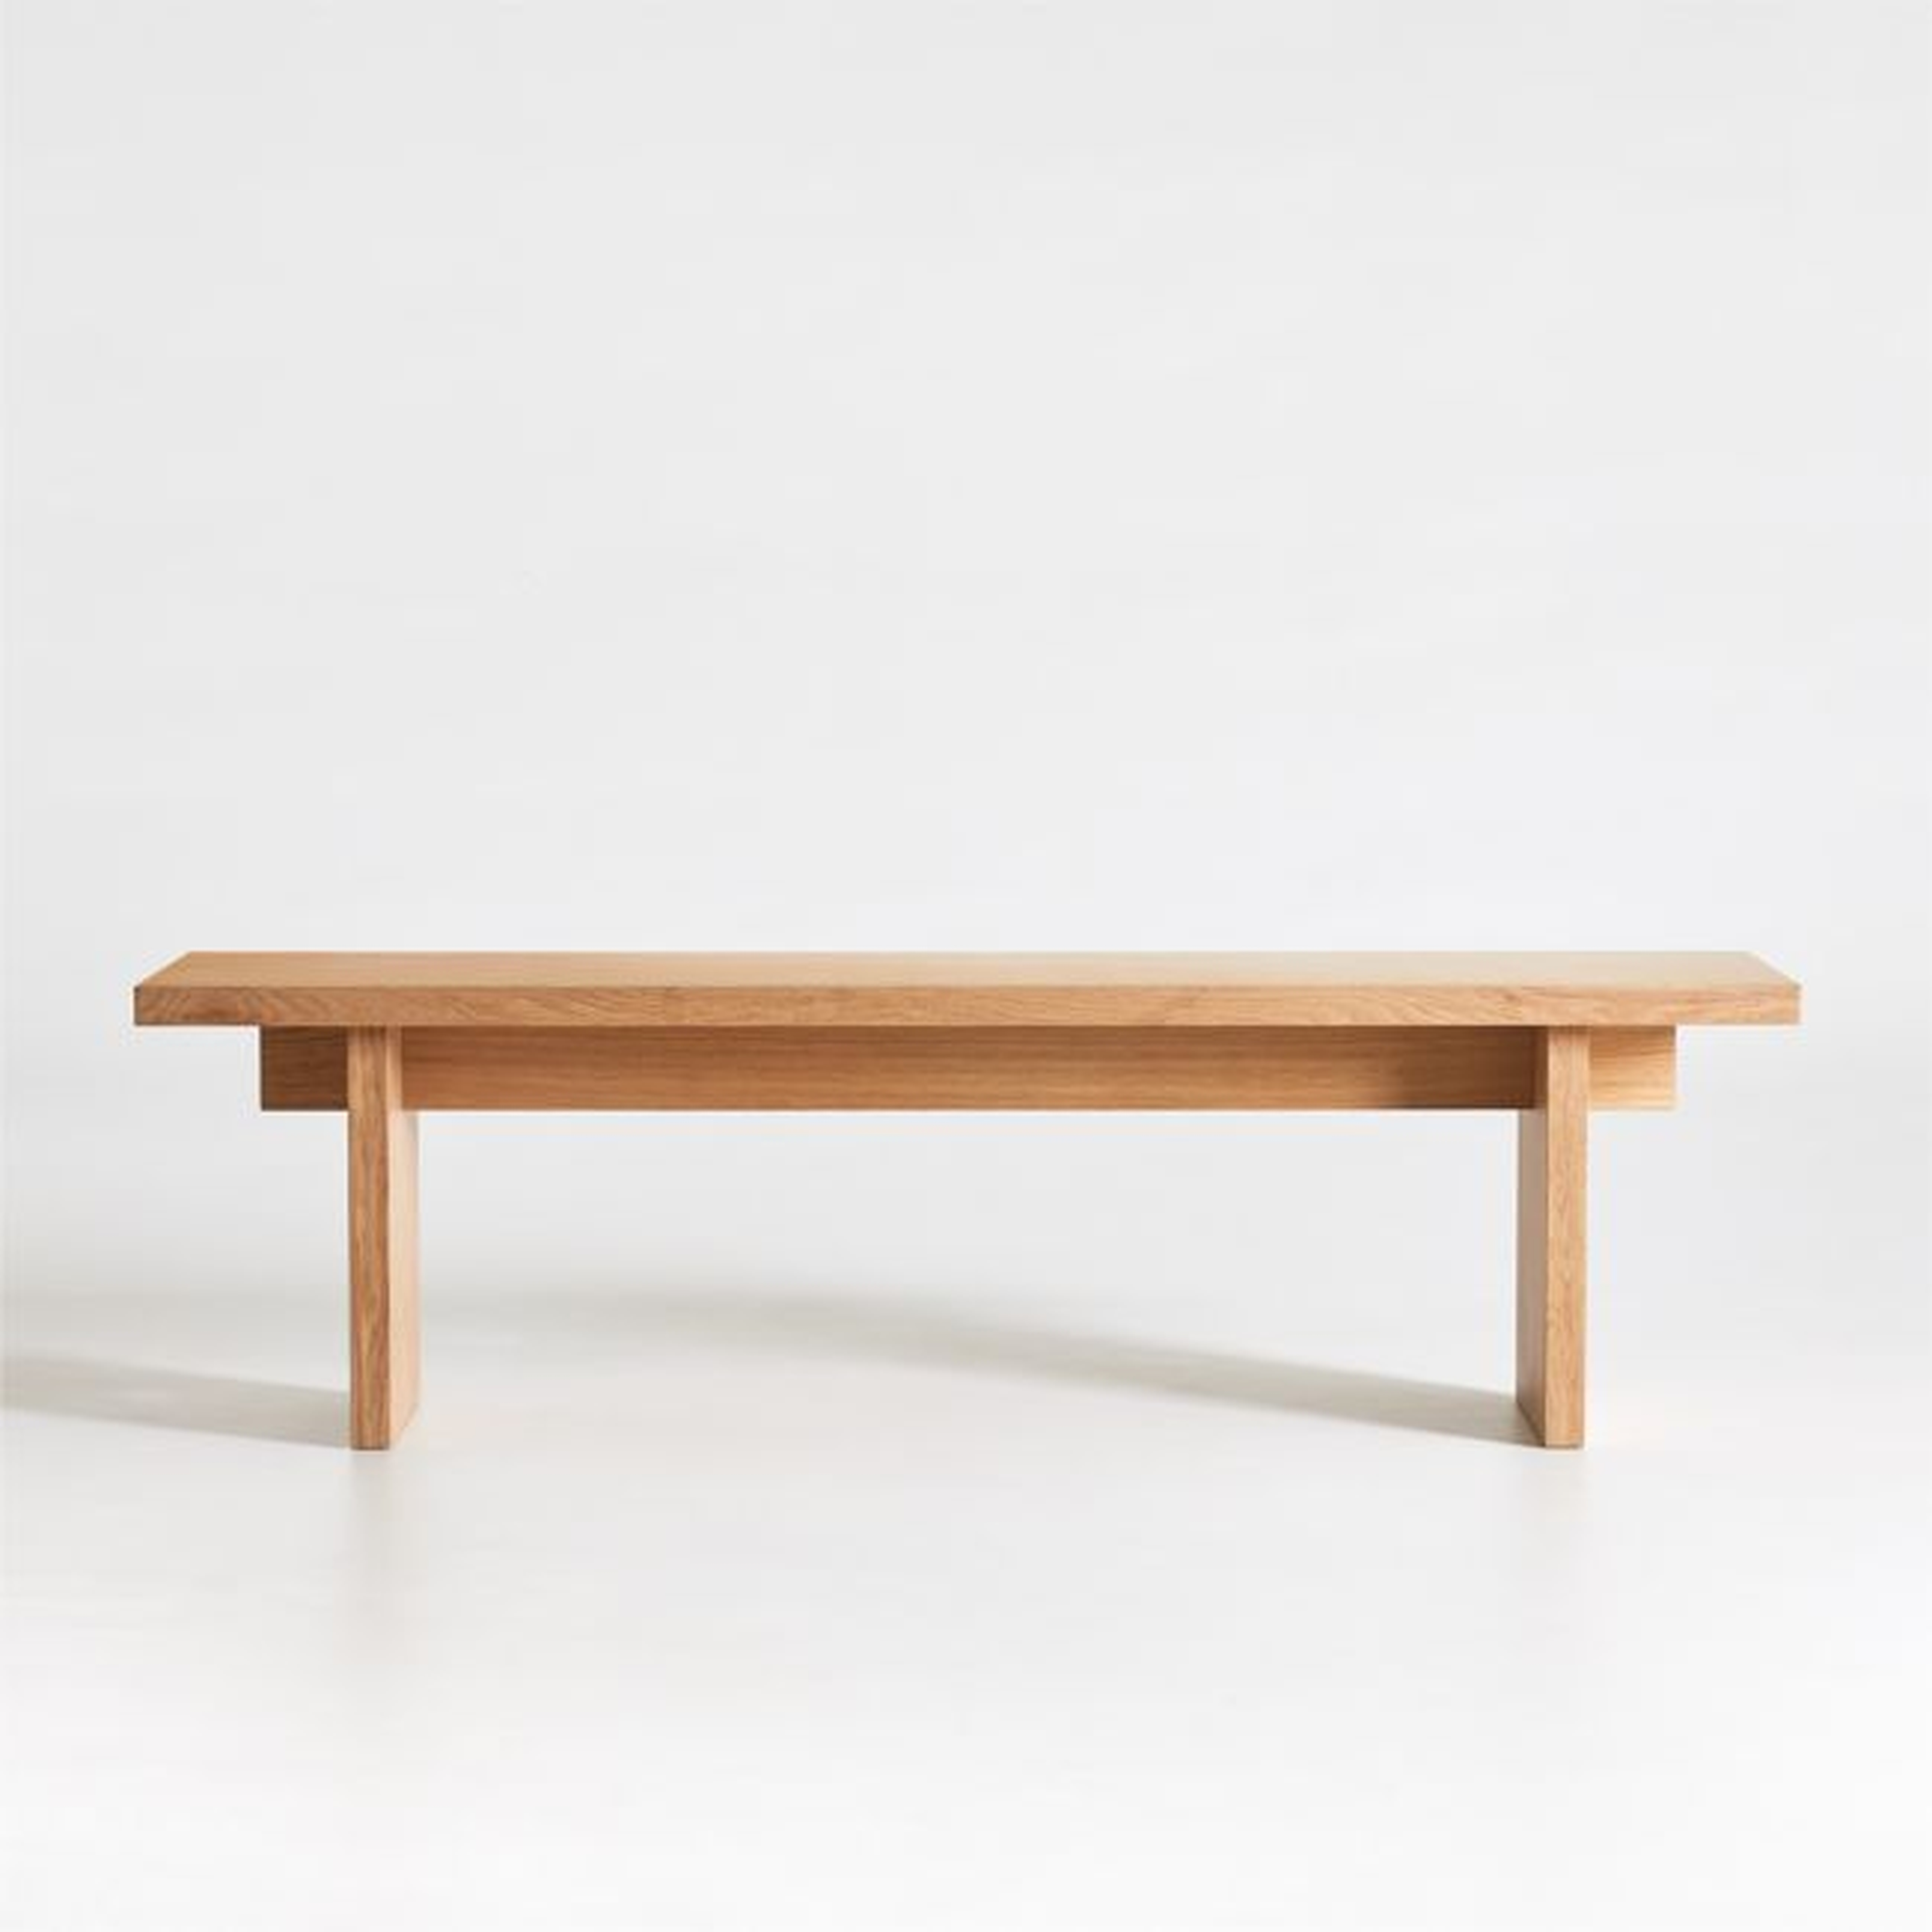 Paradox Modern Dining Bench - Crate and Barrel